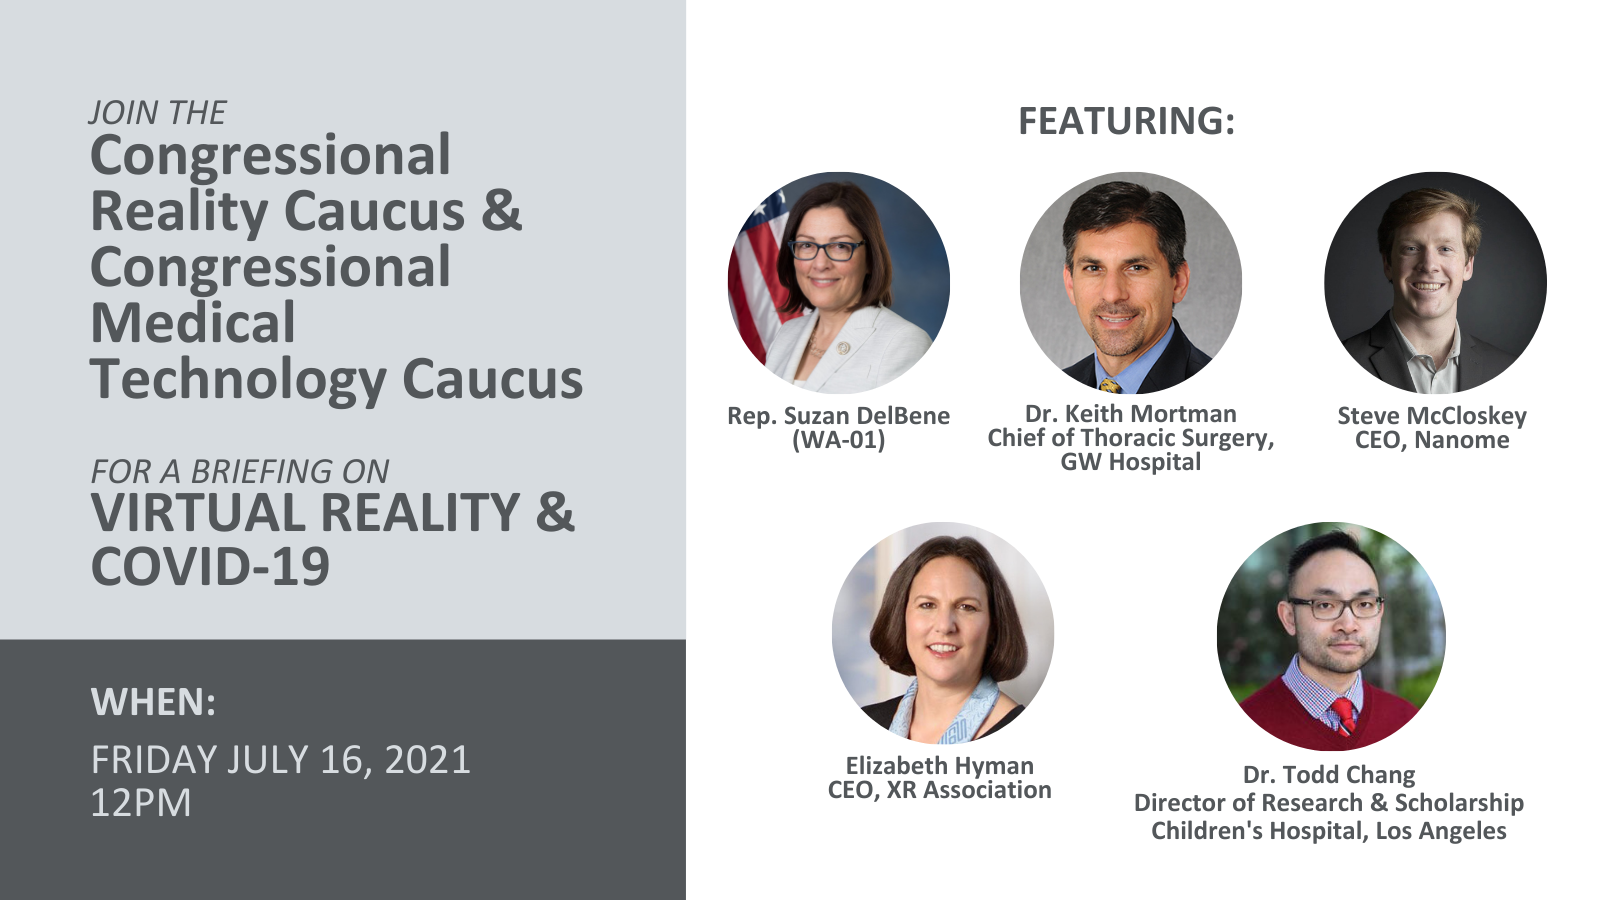 LIZ HYMAN PARTICIPATES IN HOUSE REALITY CAUCUS/MEDICAL TECHNOLOGY CAUCUS EVENT